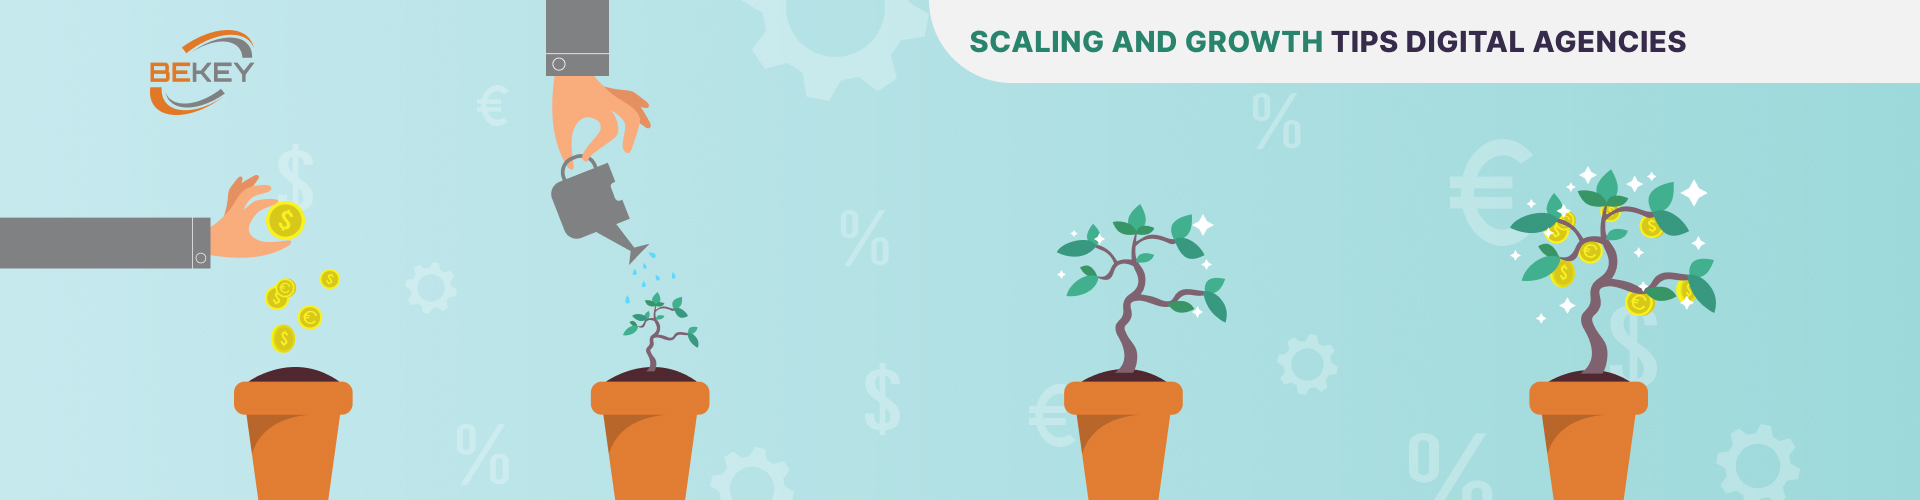 Scaling and growth tips digital agencies